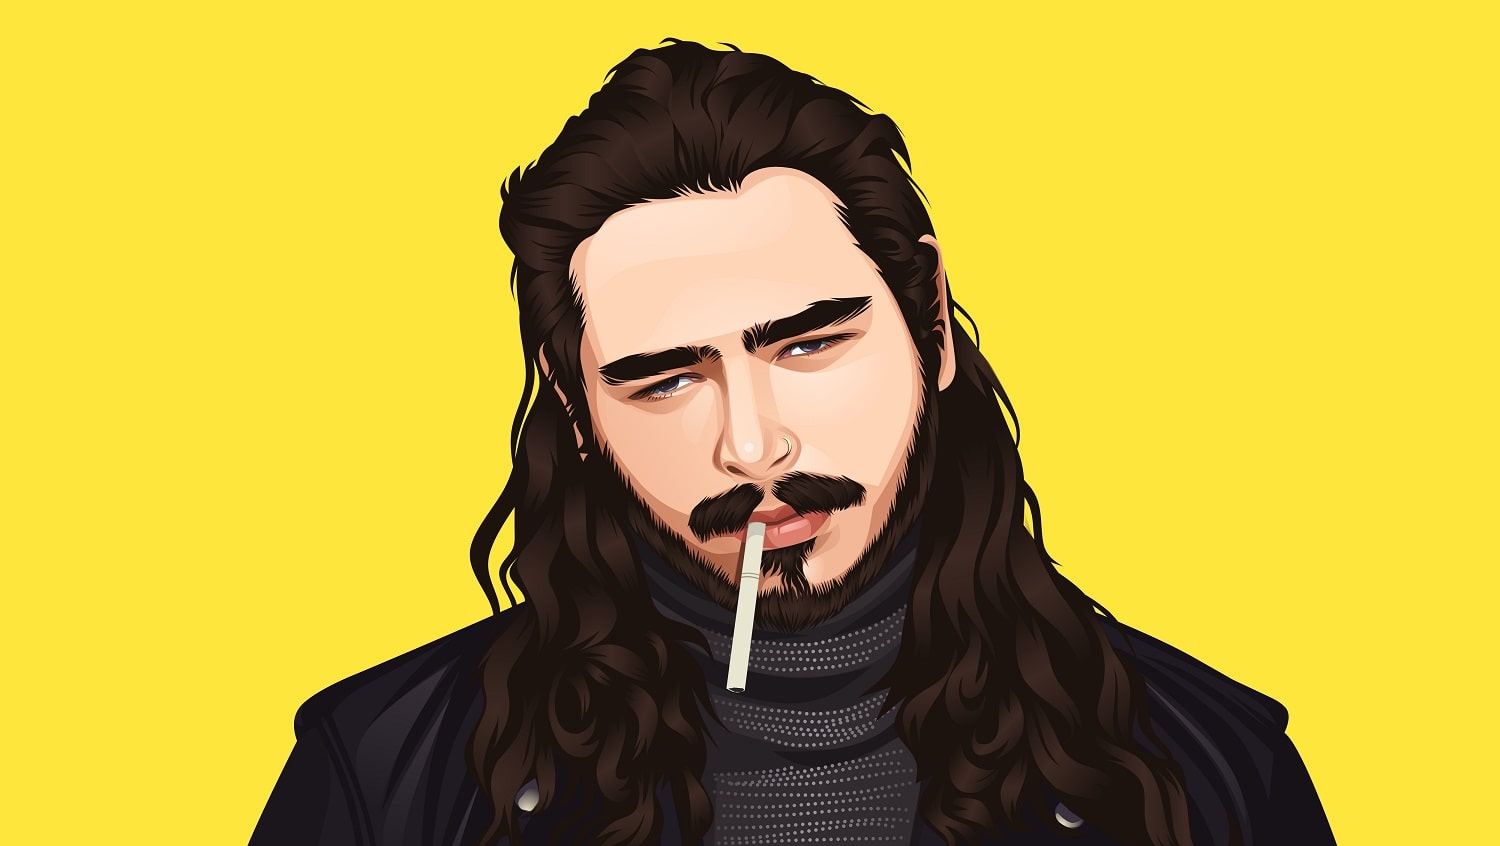 Post Malone Copyright by Inspirationfeed.